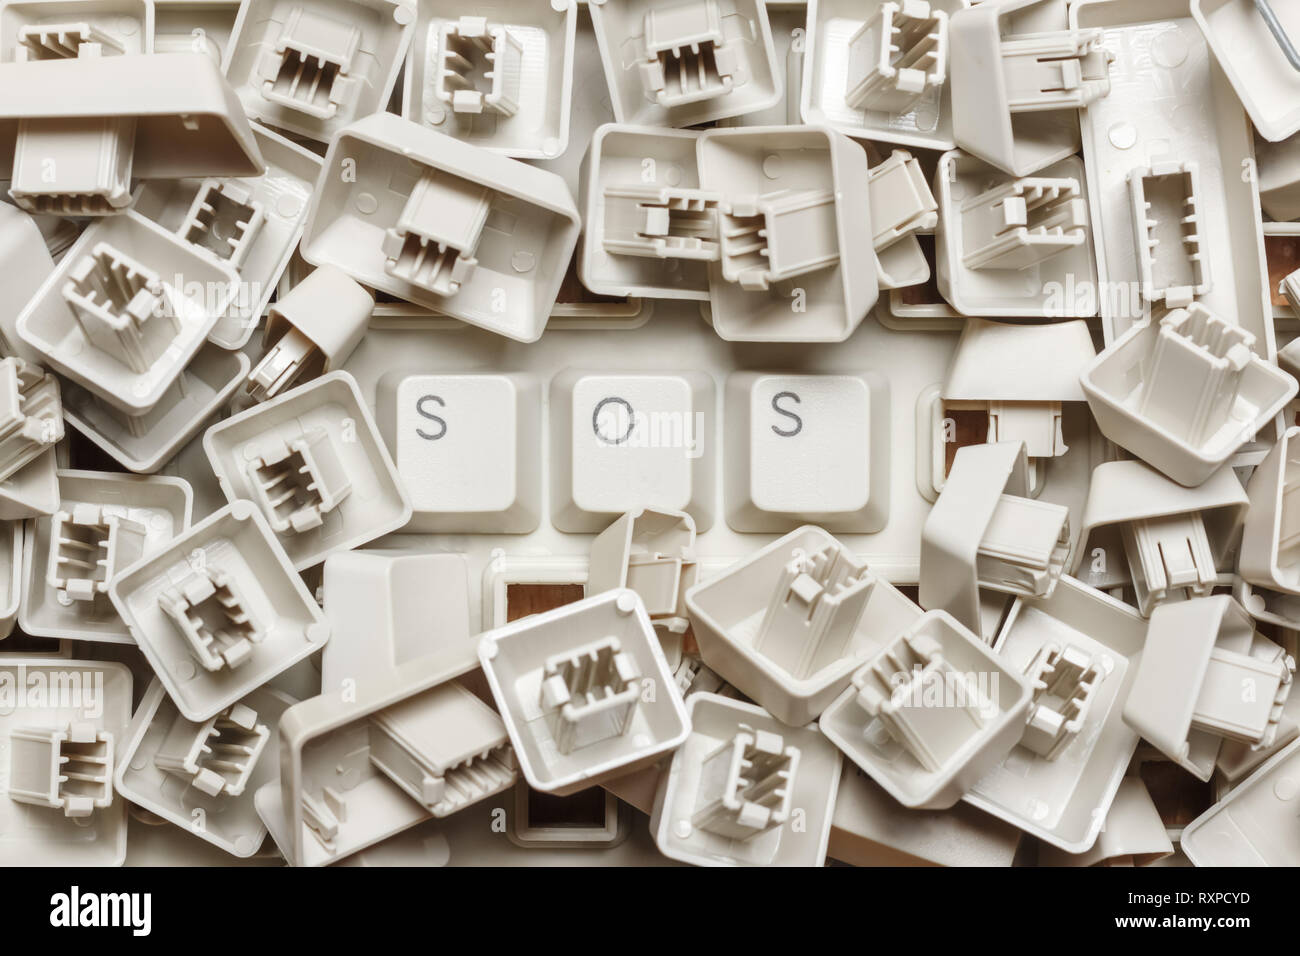 Word sos from a heap of computer keys Stock Photo